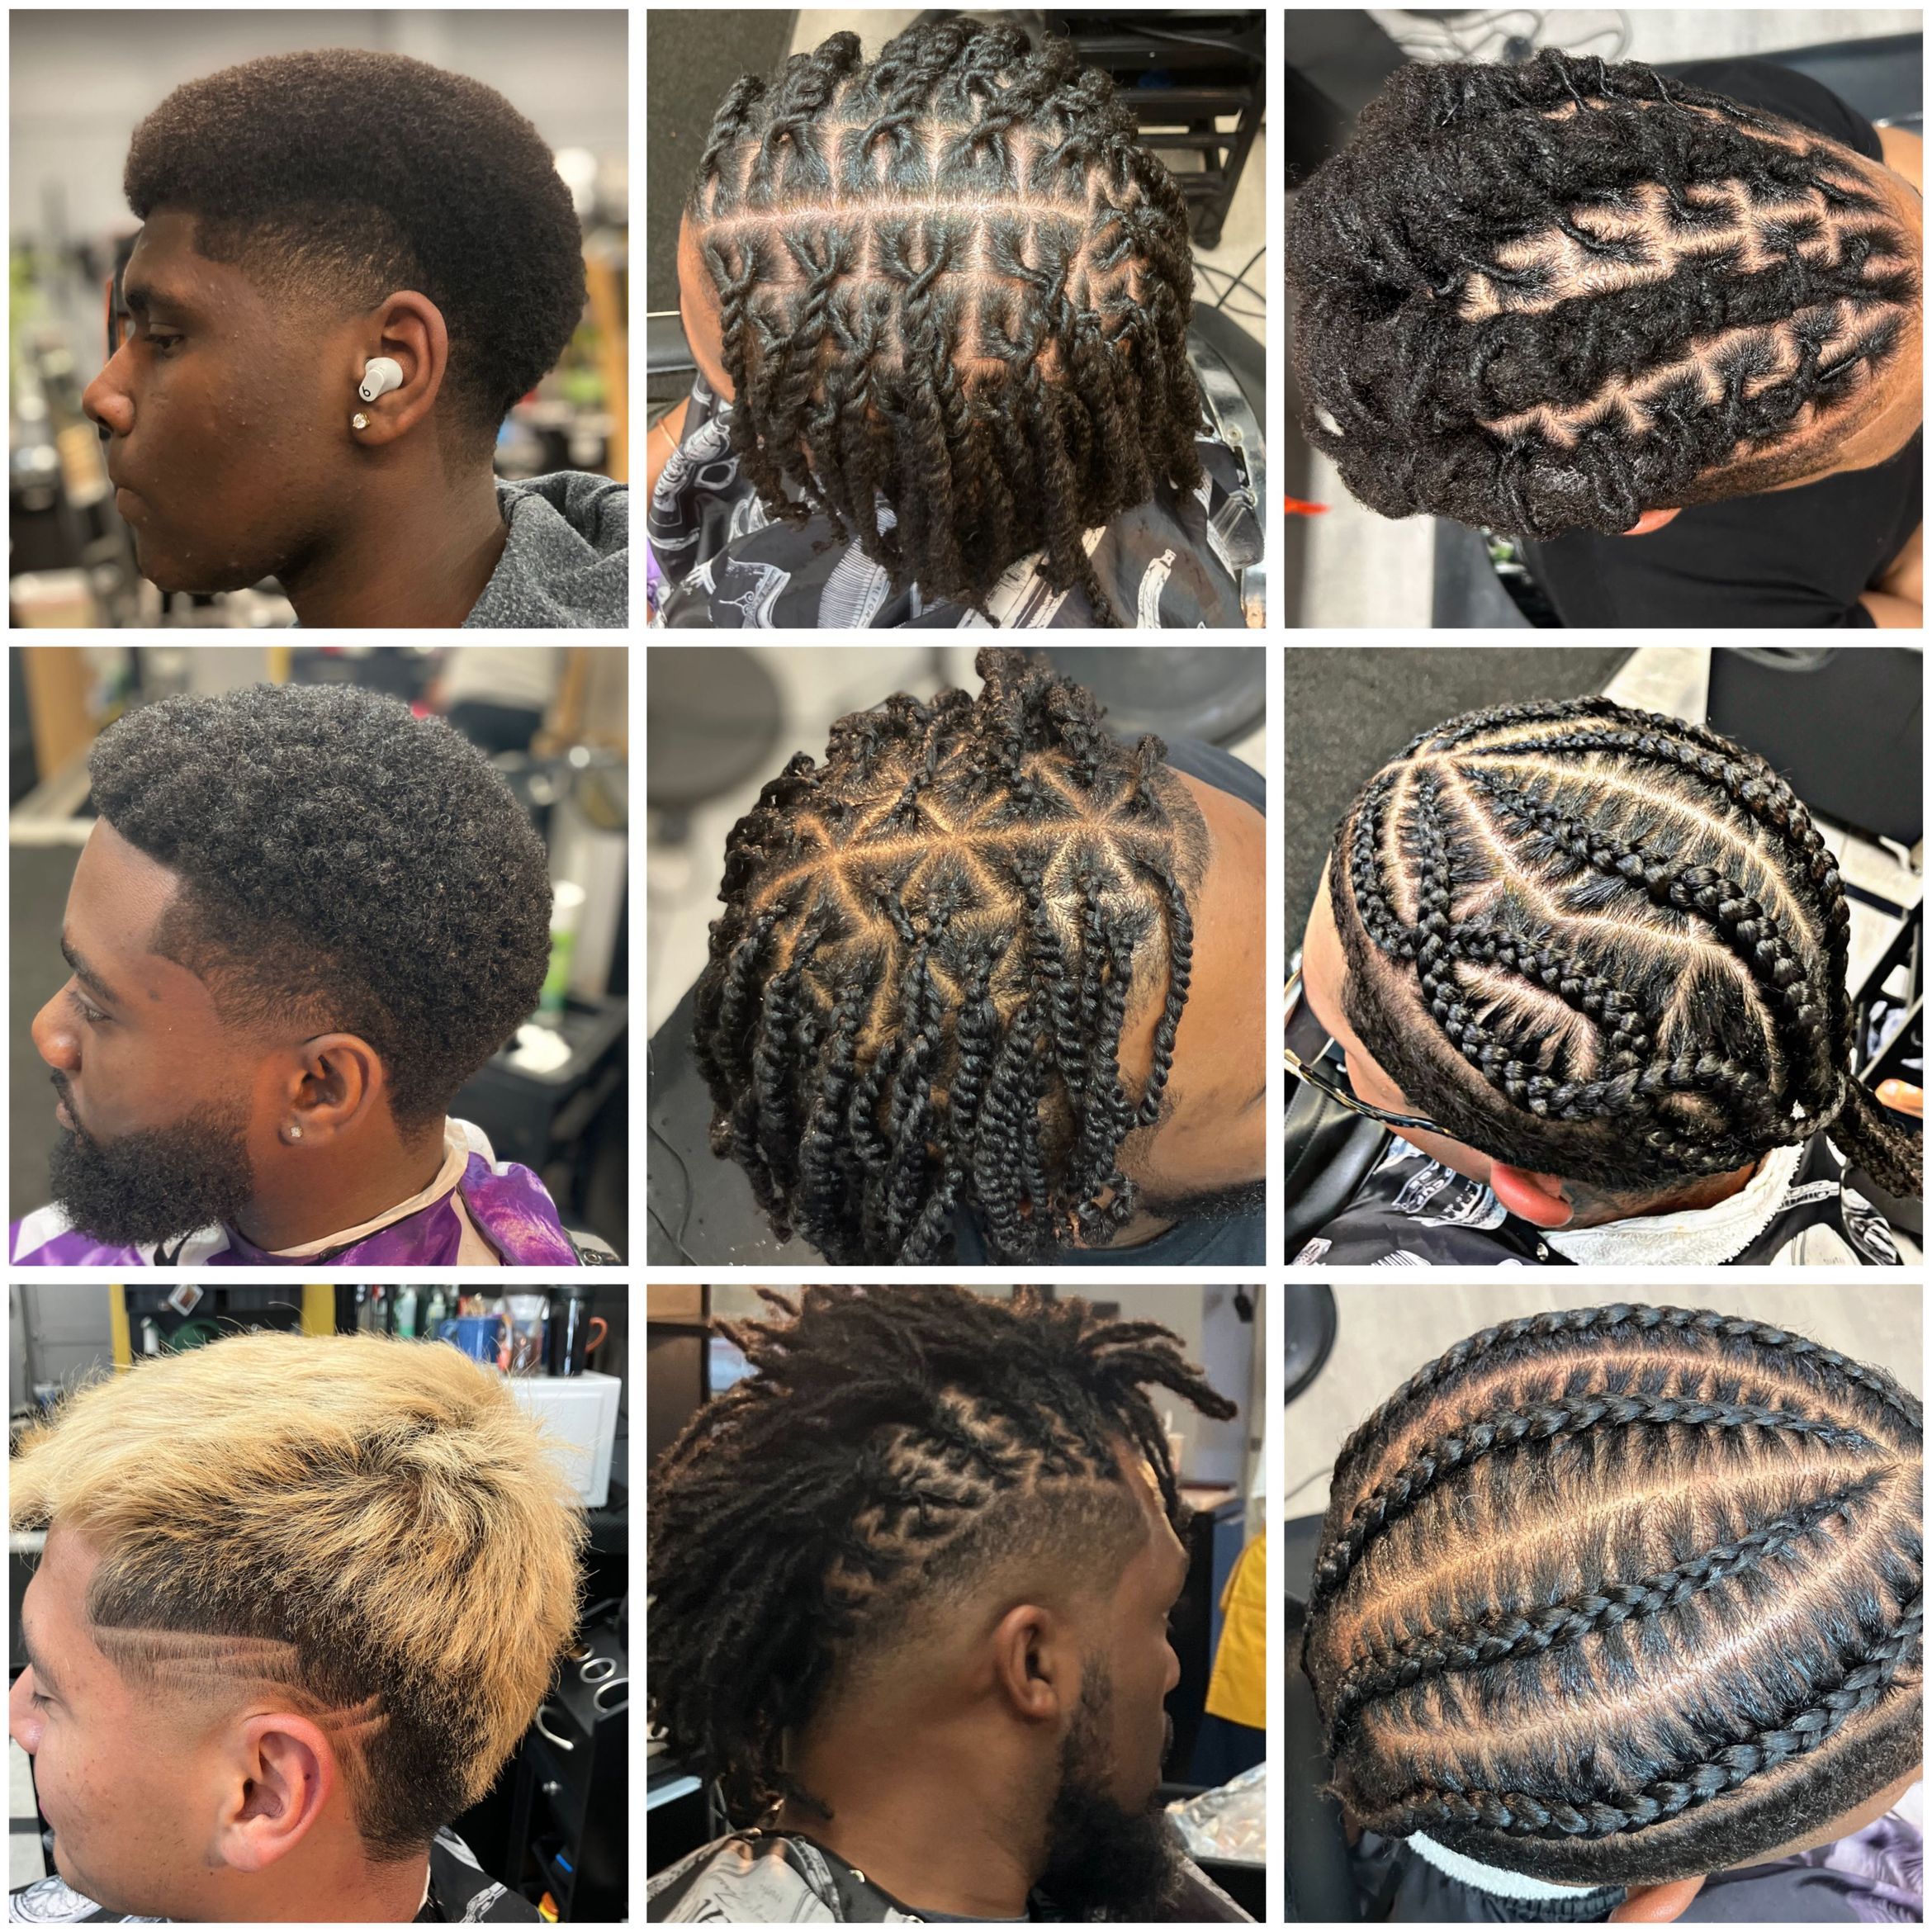 Dream The Barber @ Franks barbershop and Salon, 1026 Madison St, Seattle, 98104